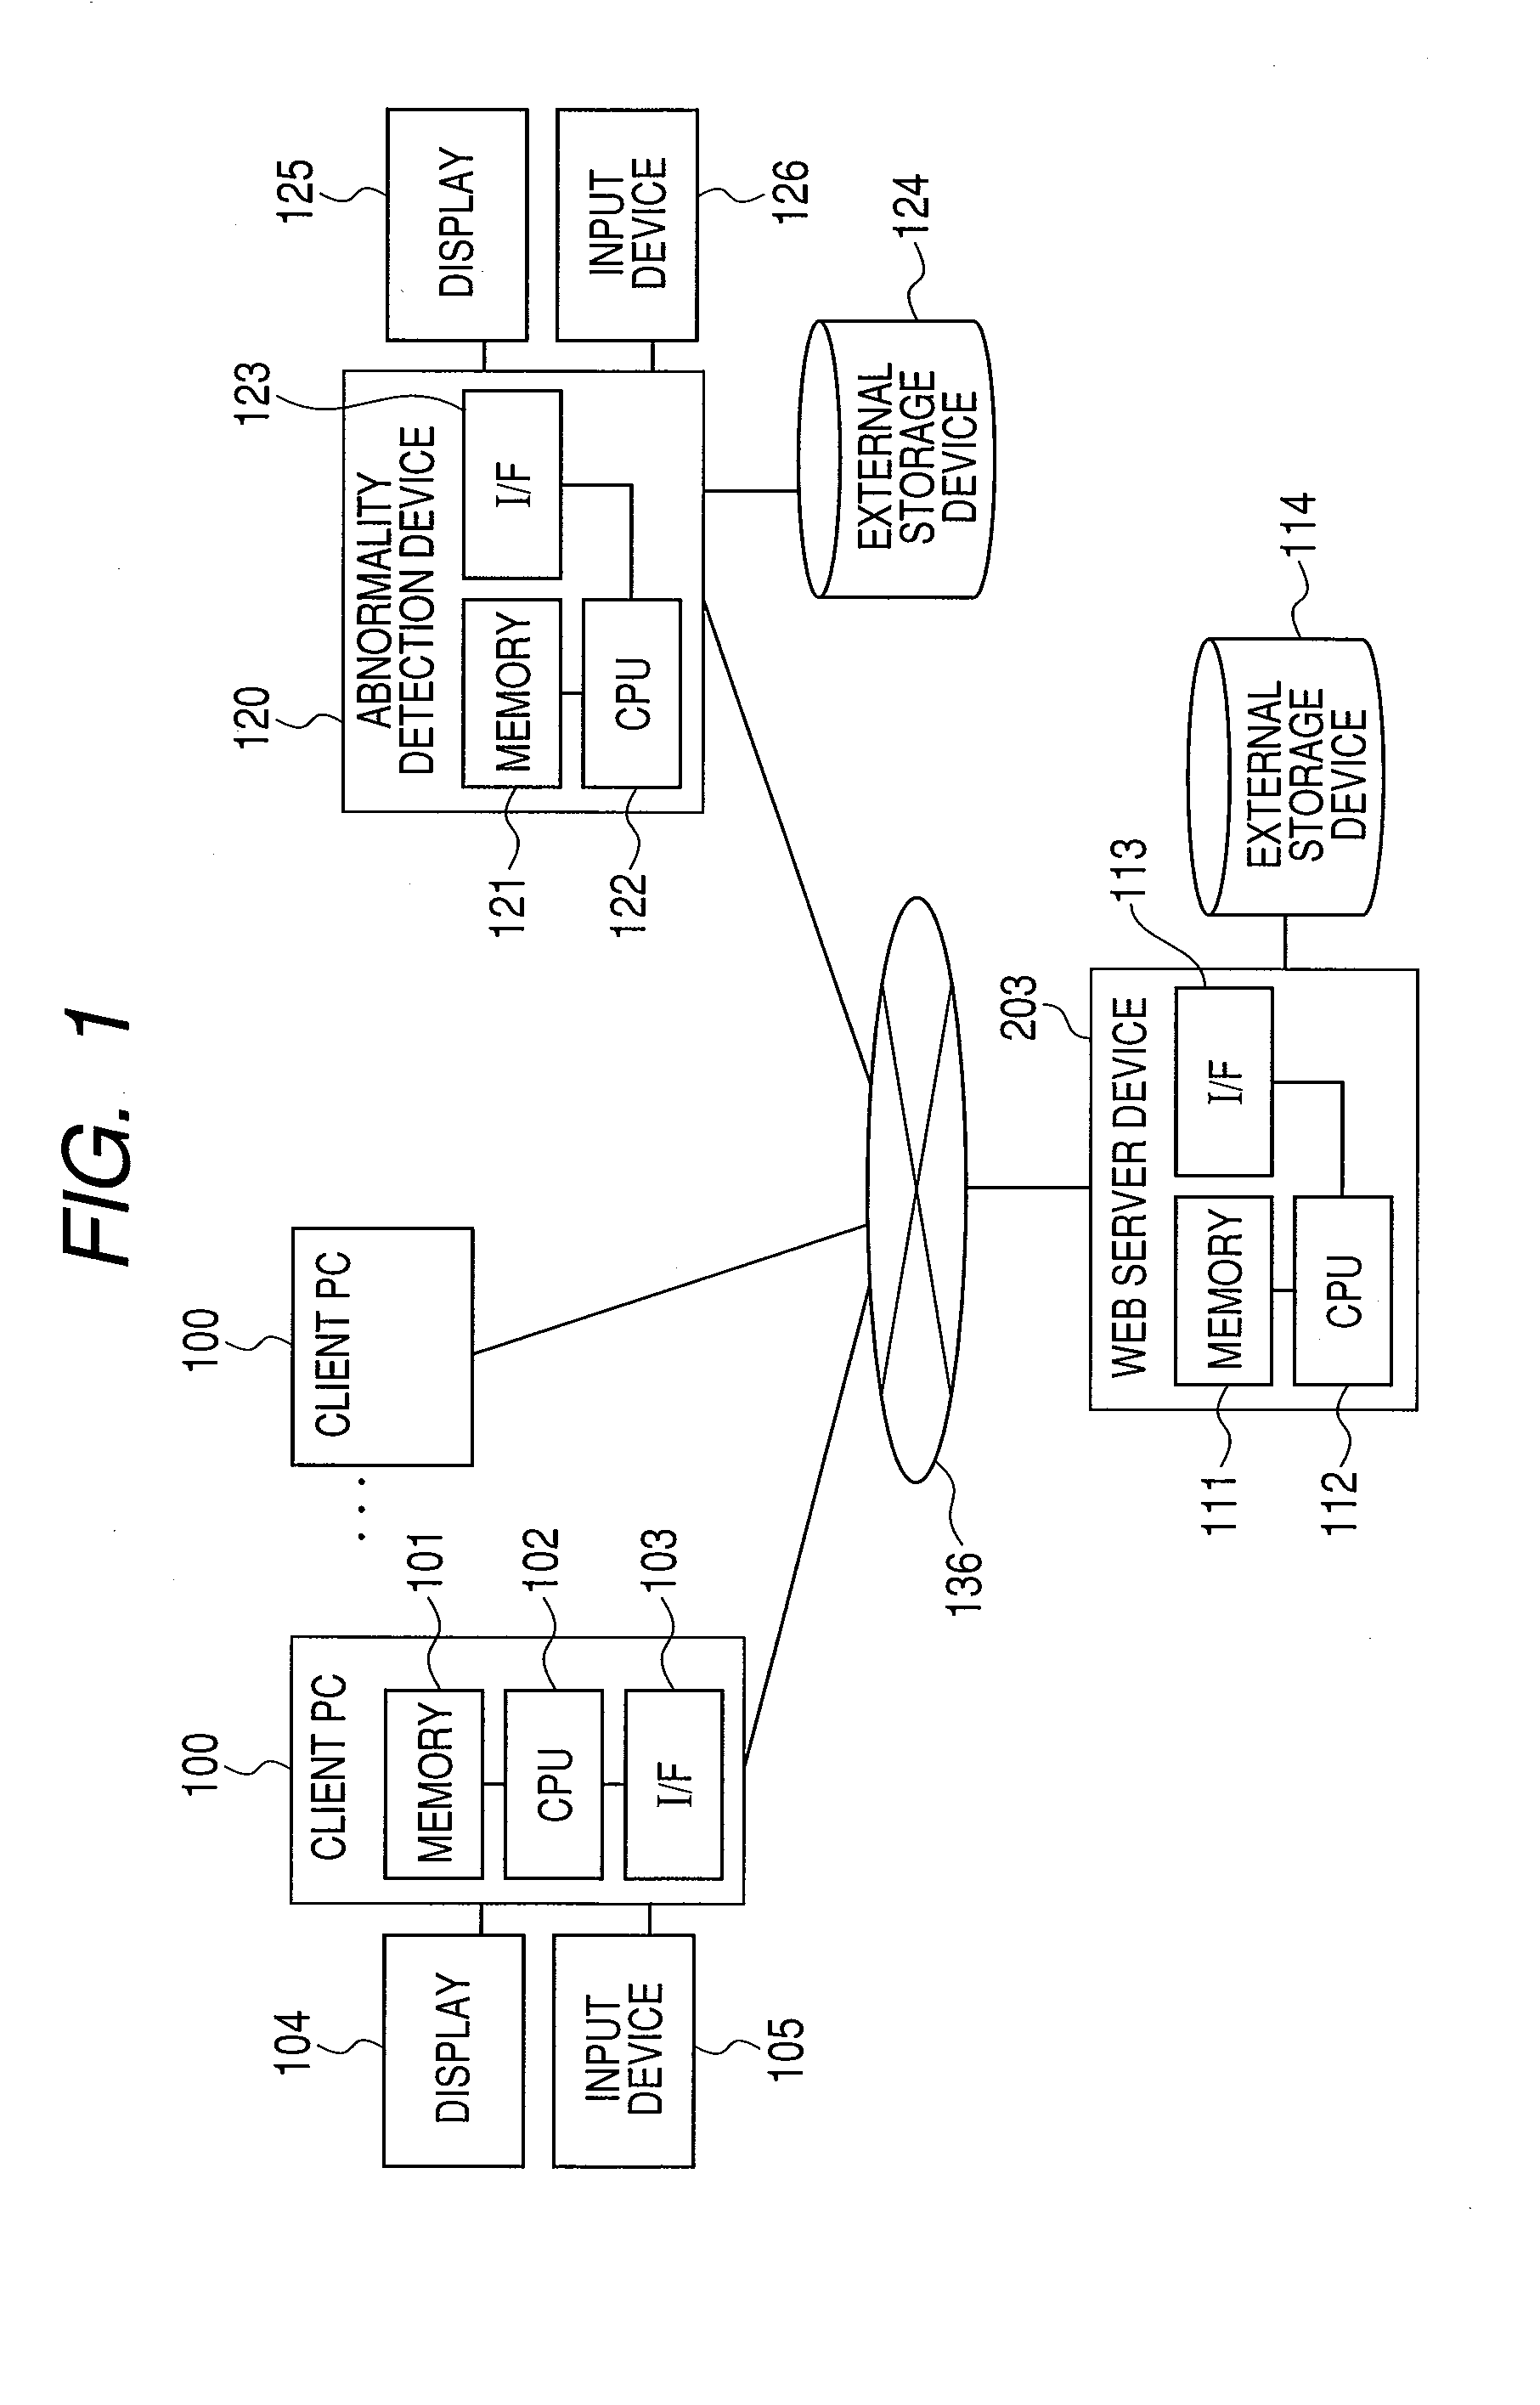 Abnormality detection method, device and program